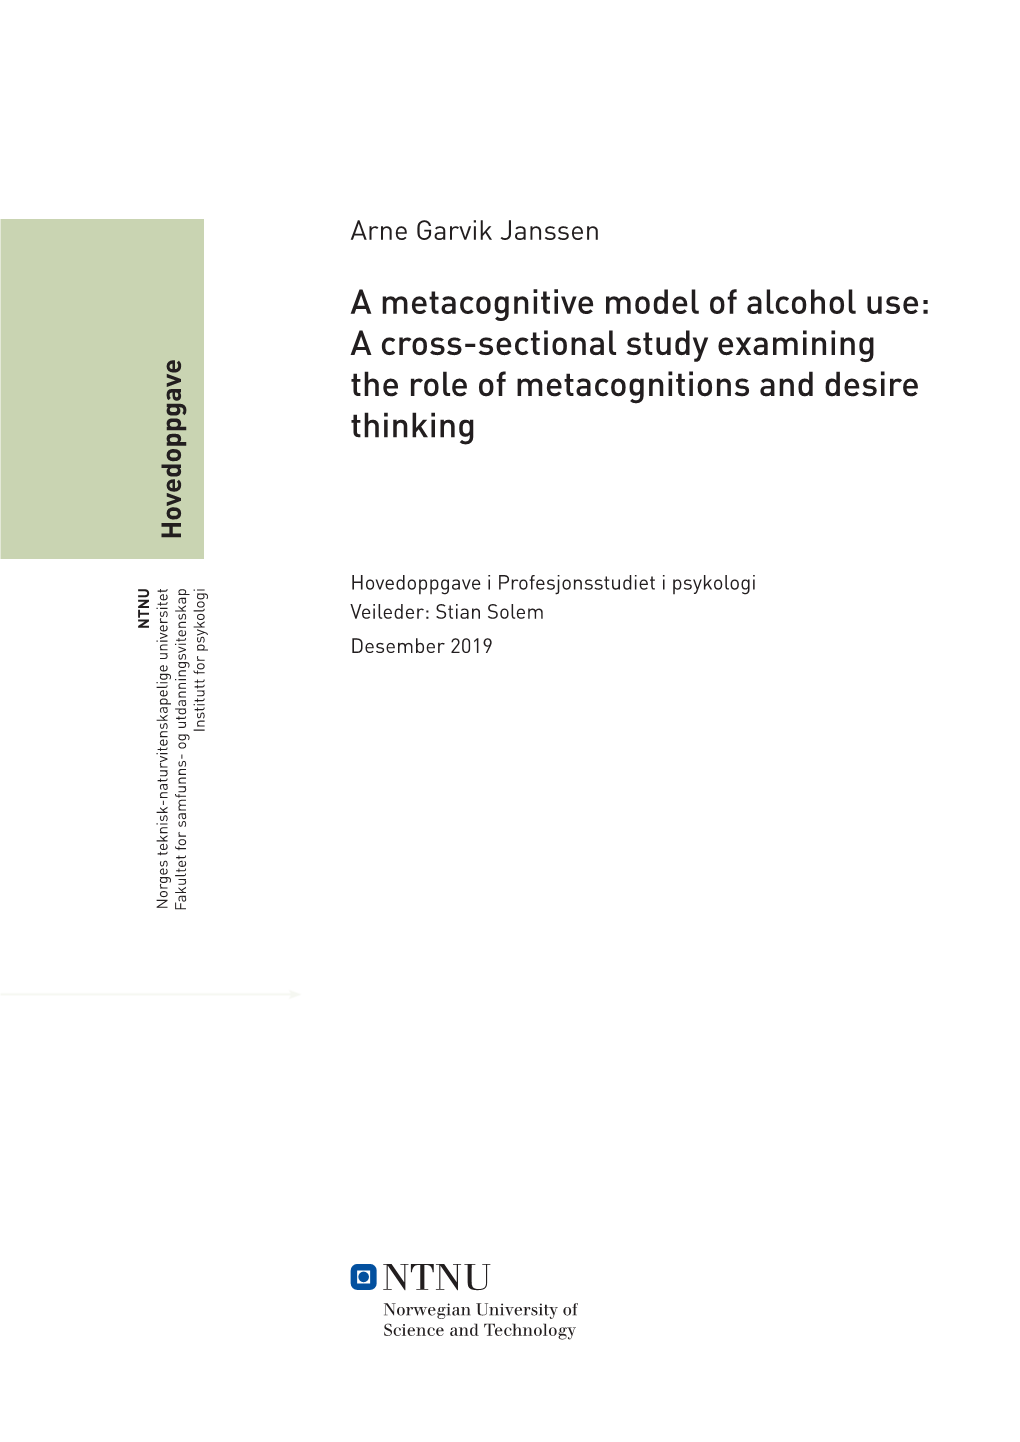 A Metacognitive Model of Alcohol Use: a Cross-Sectional Study Examining the Role of Metacognitions and Desire Thinking